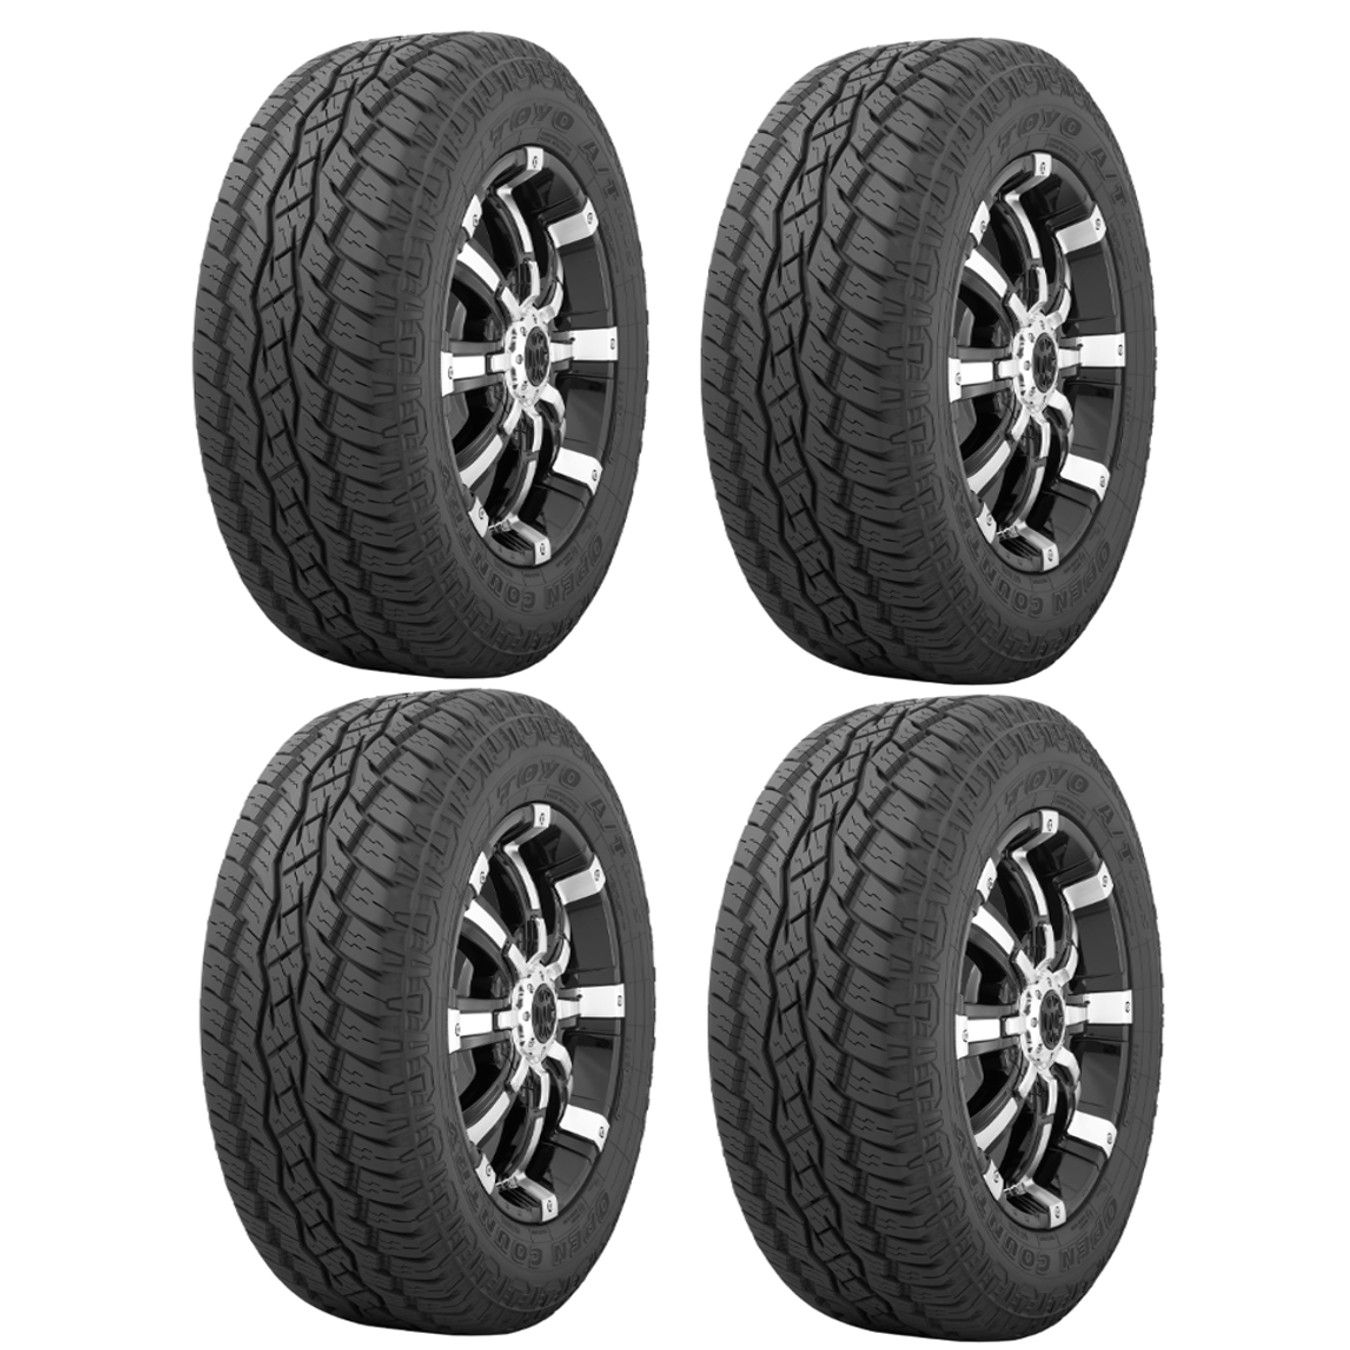 4 X Toyo Open Country A T Plus Road Off Road Tyres 265 70 16 265 70 16 112h Ebay